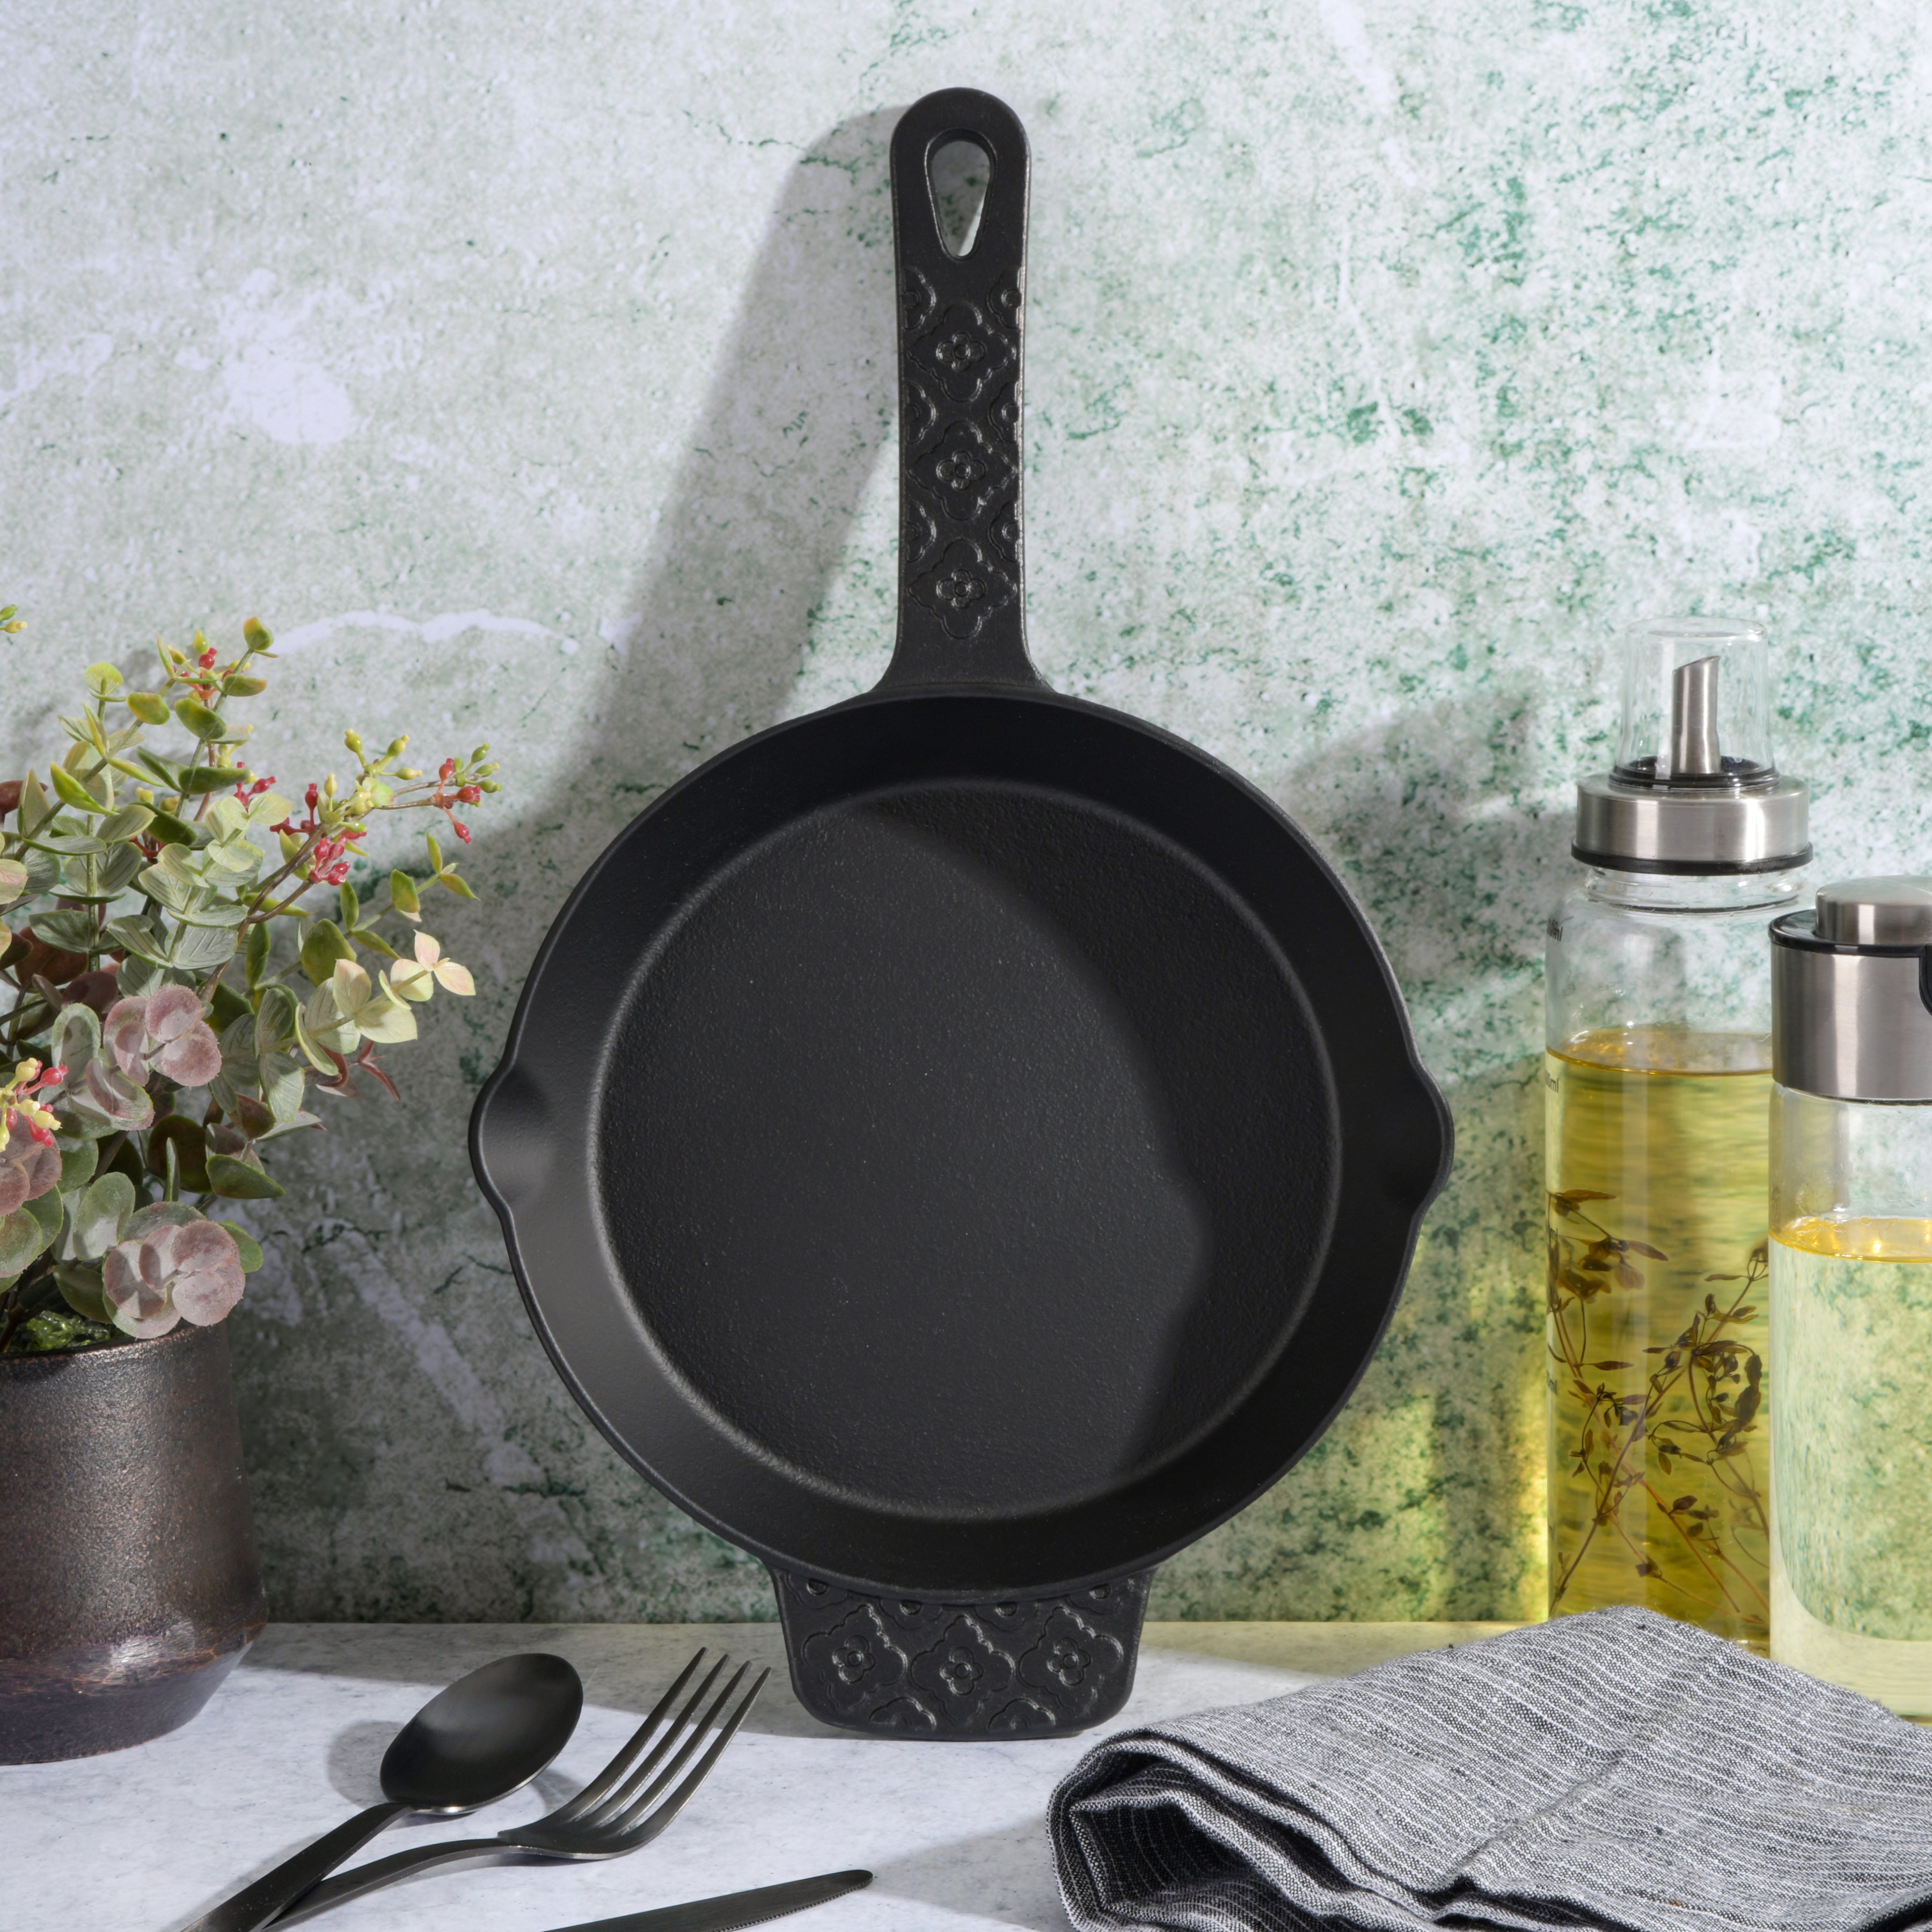 Pre-Seasoned Cast Iron Skillet (8-Inch) W/Glass Lid and silicone Handle  Cover